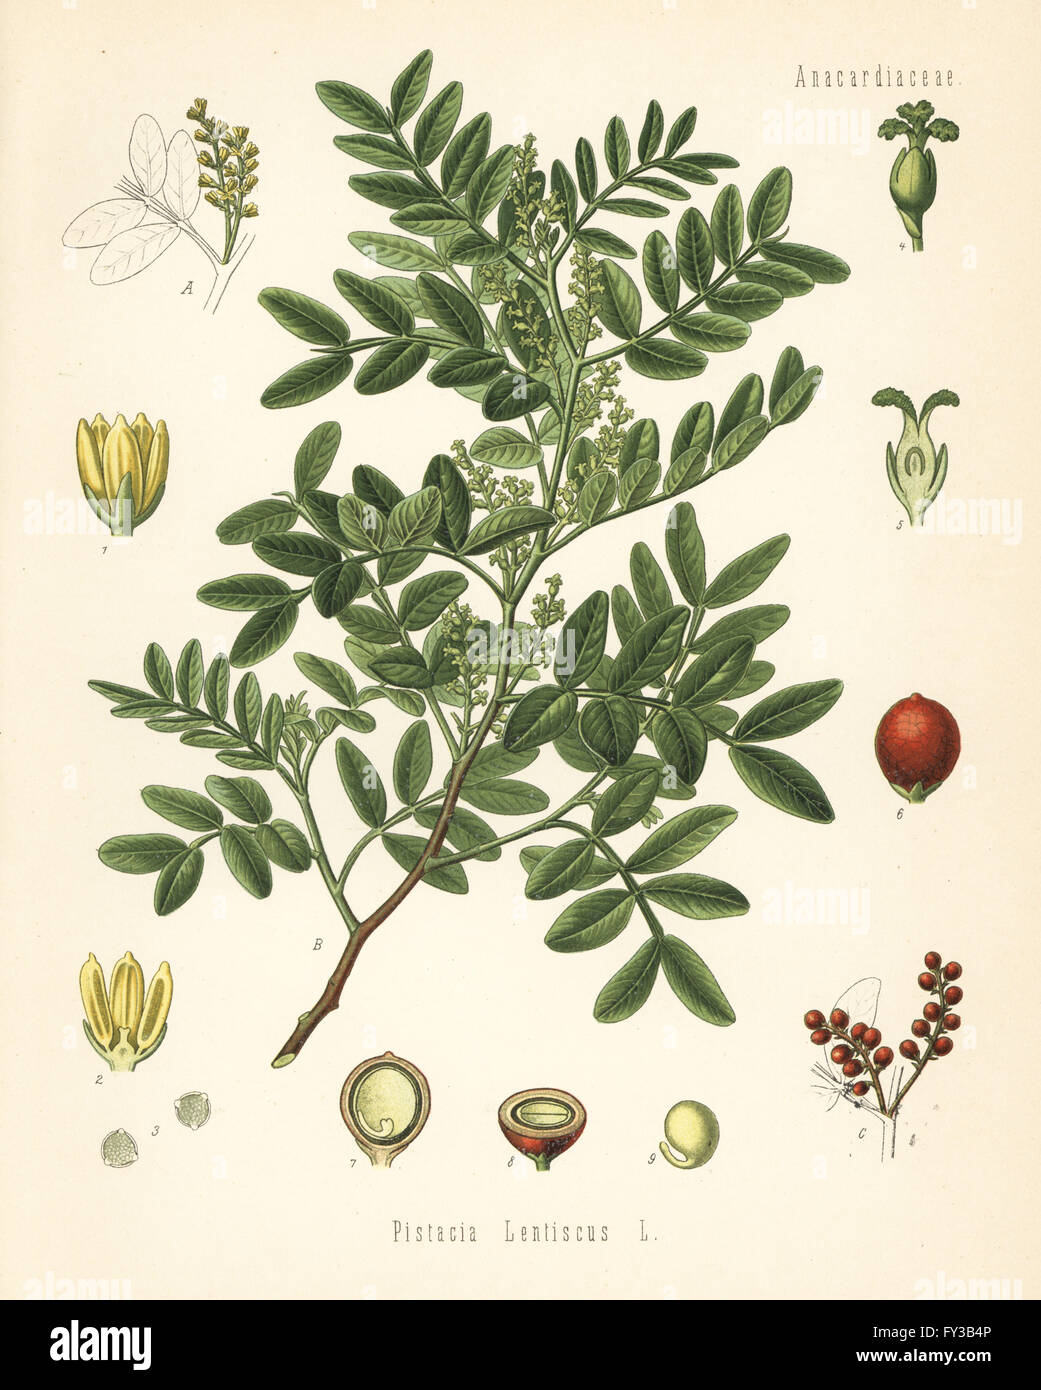 Mastic, Pistacia lentiscus. Chromolithograph after a botanical illustration from Hermann Adolph Koehler's Medicinal Plants, edited by Gustav Pabst, Koehler, Germany, 1887. Stock Photo